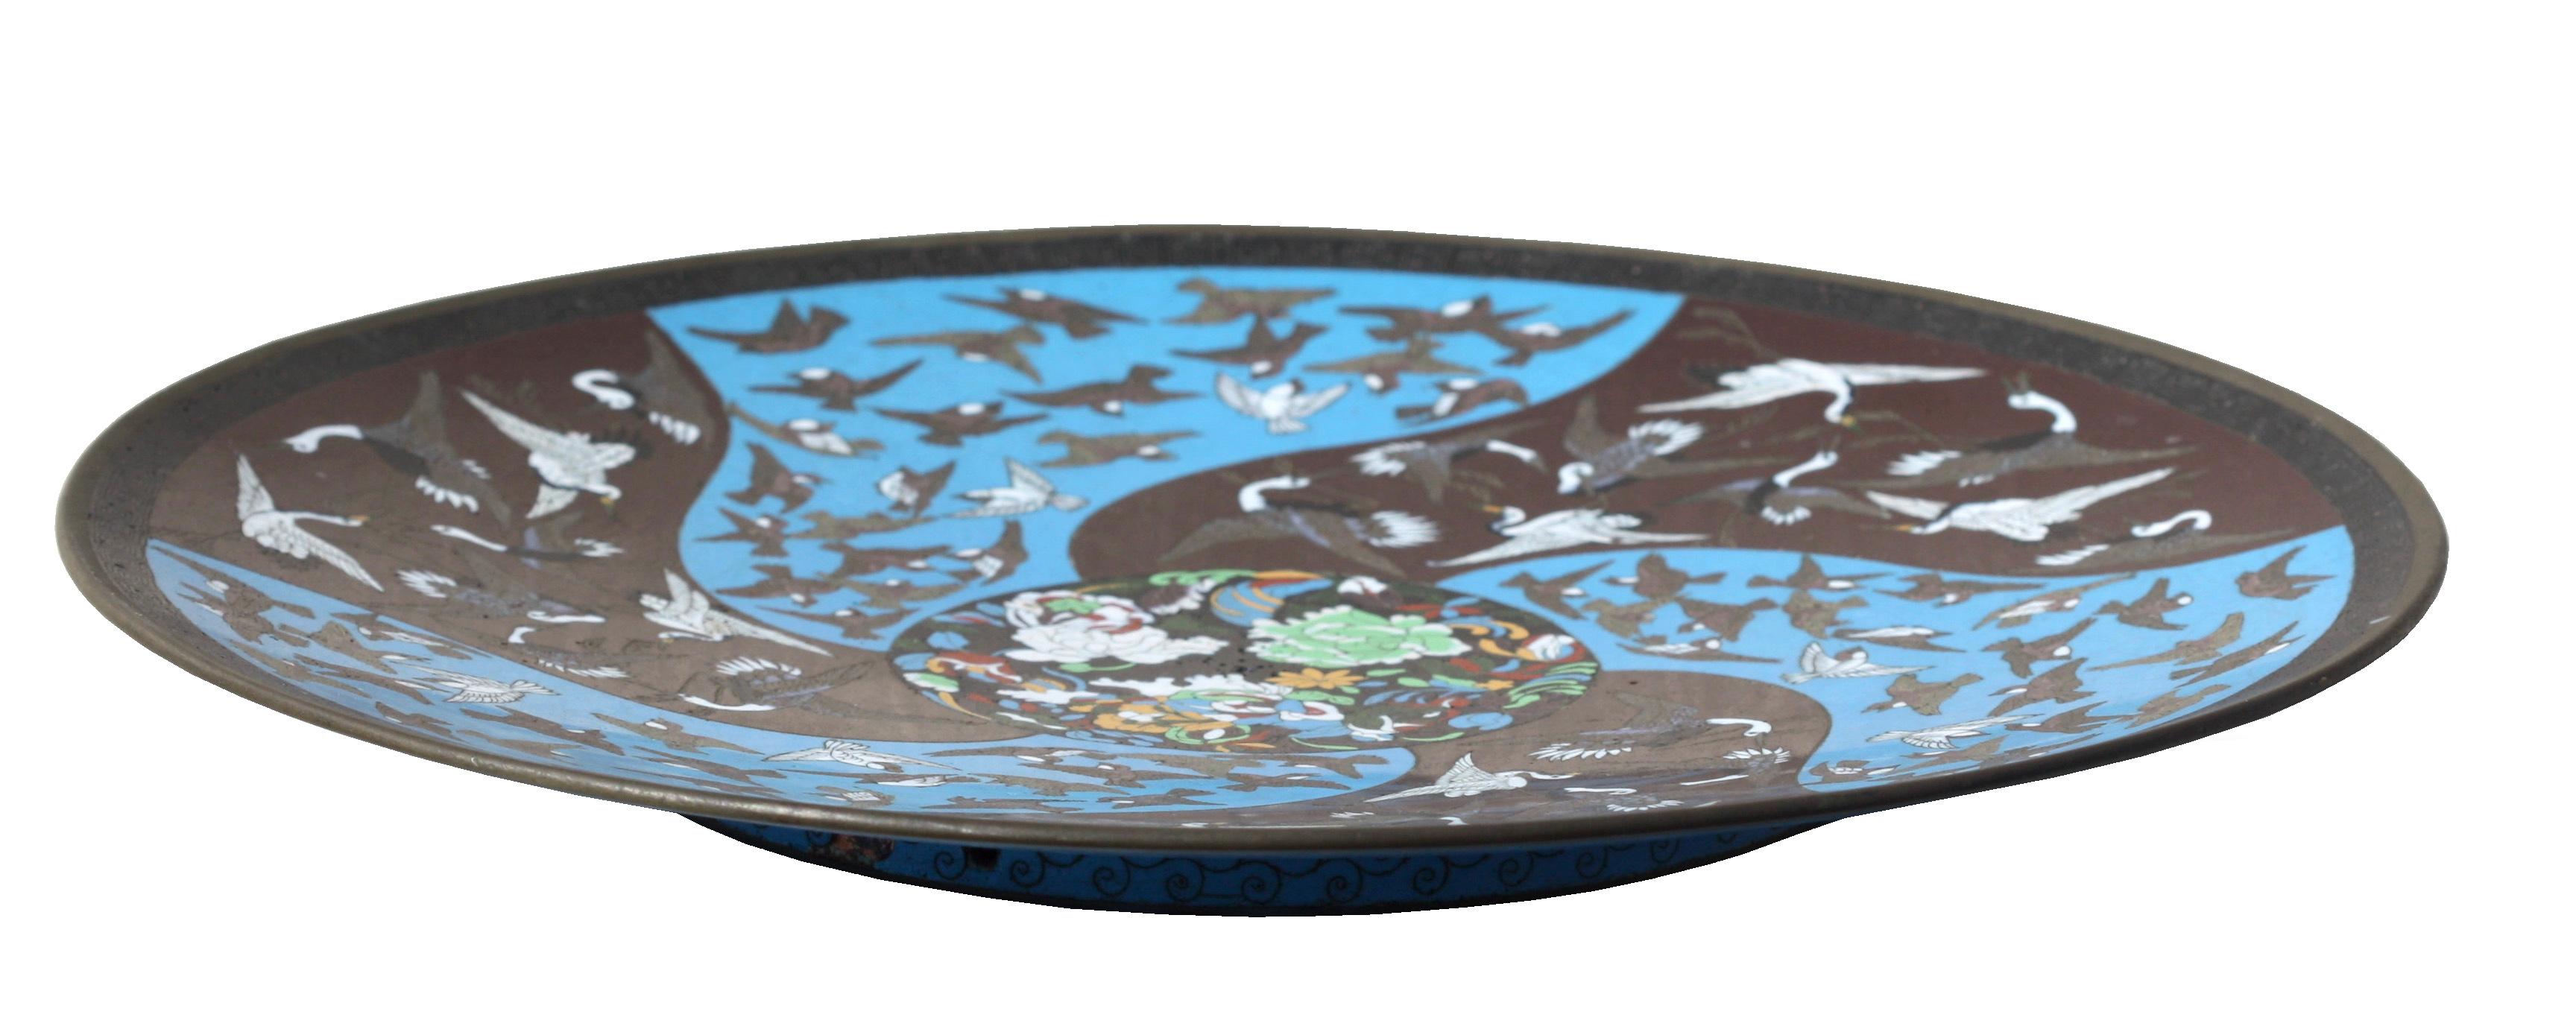 A pair of Chinese cloisonné enamel plates
decorated with birds on a light blue ground
Measure: Diameter 11 3/4 inches.